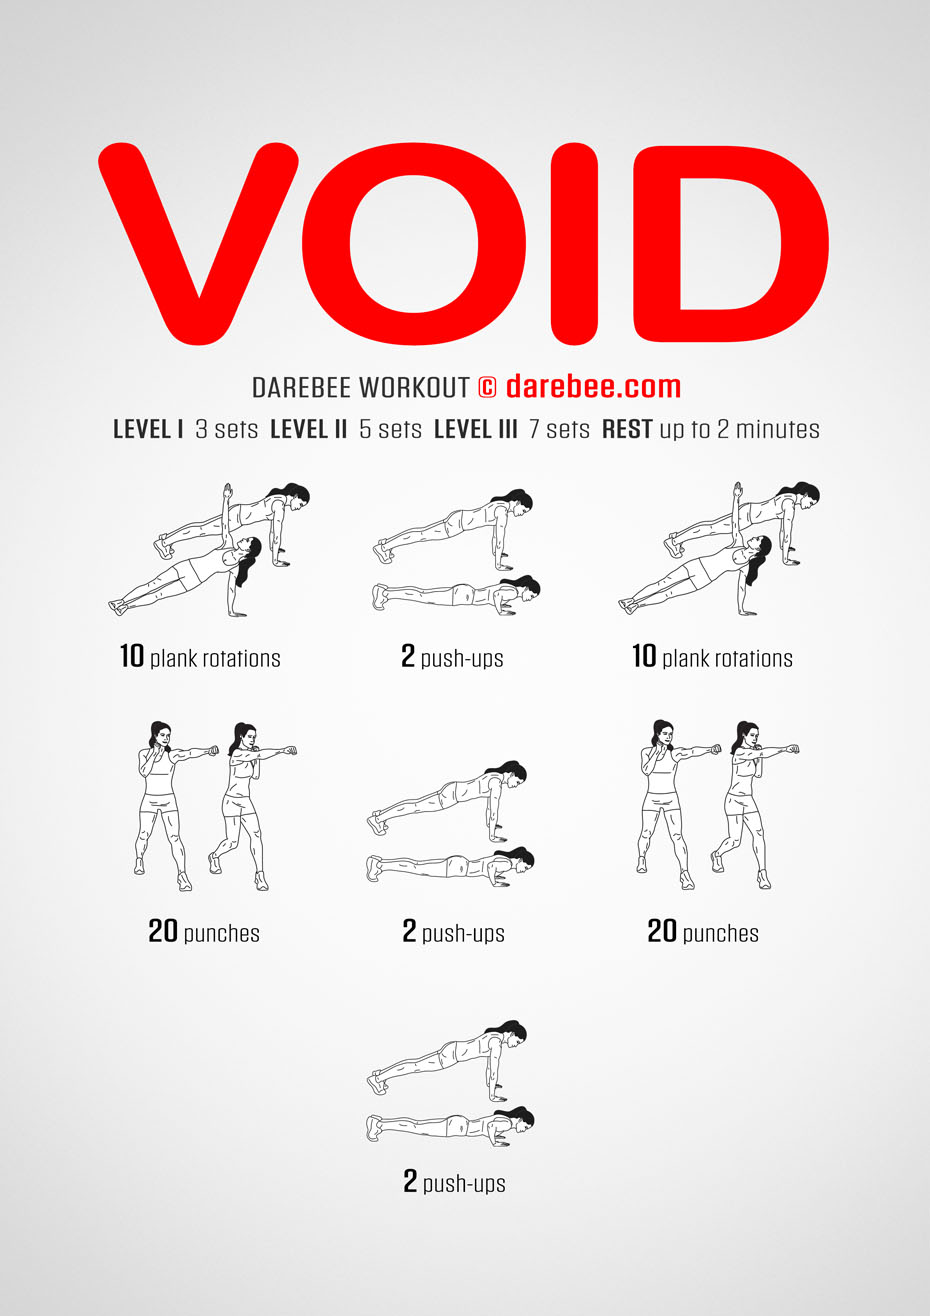 Void is a Darebee home-fitness upper body workout that combines combat moves and floor, bodyweight exercises for that special targeting of specific upper body muscles.